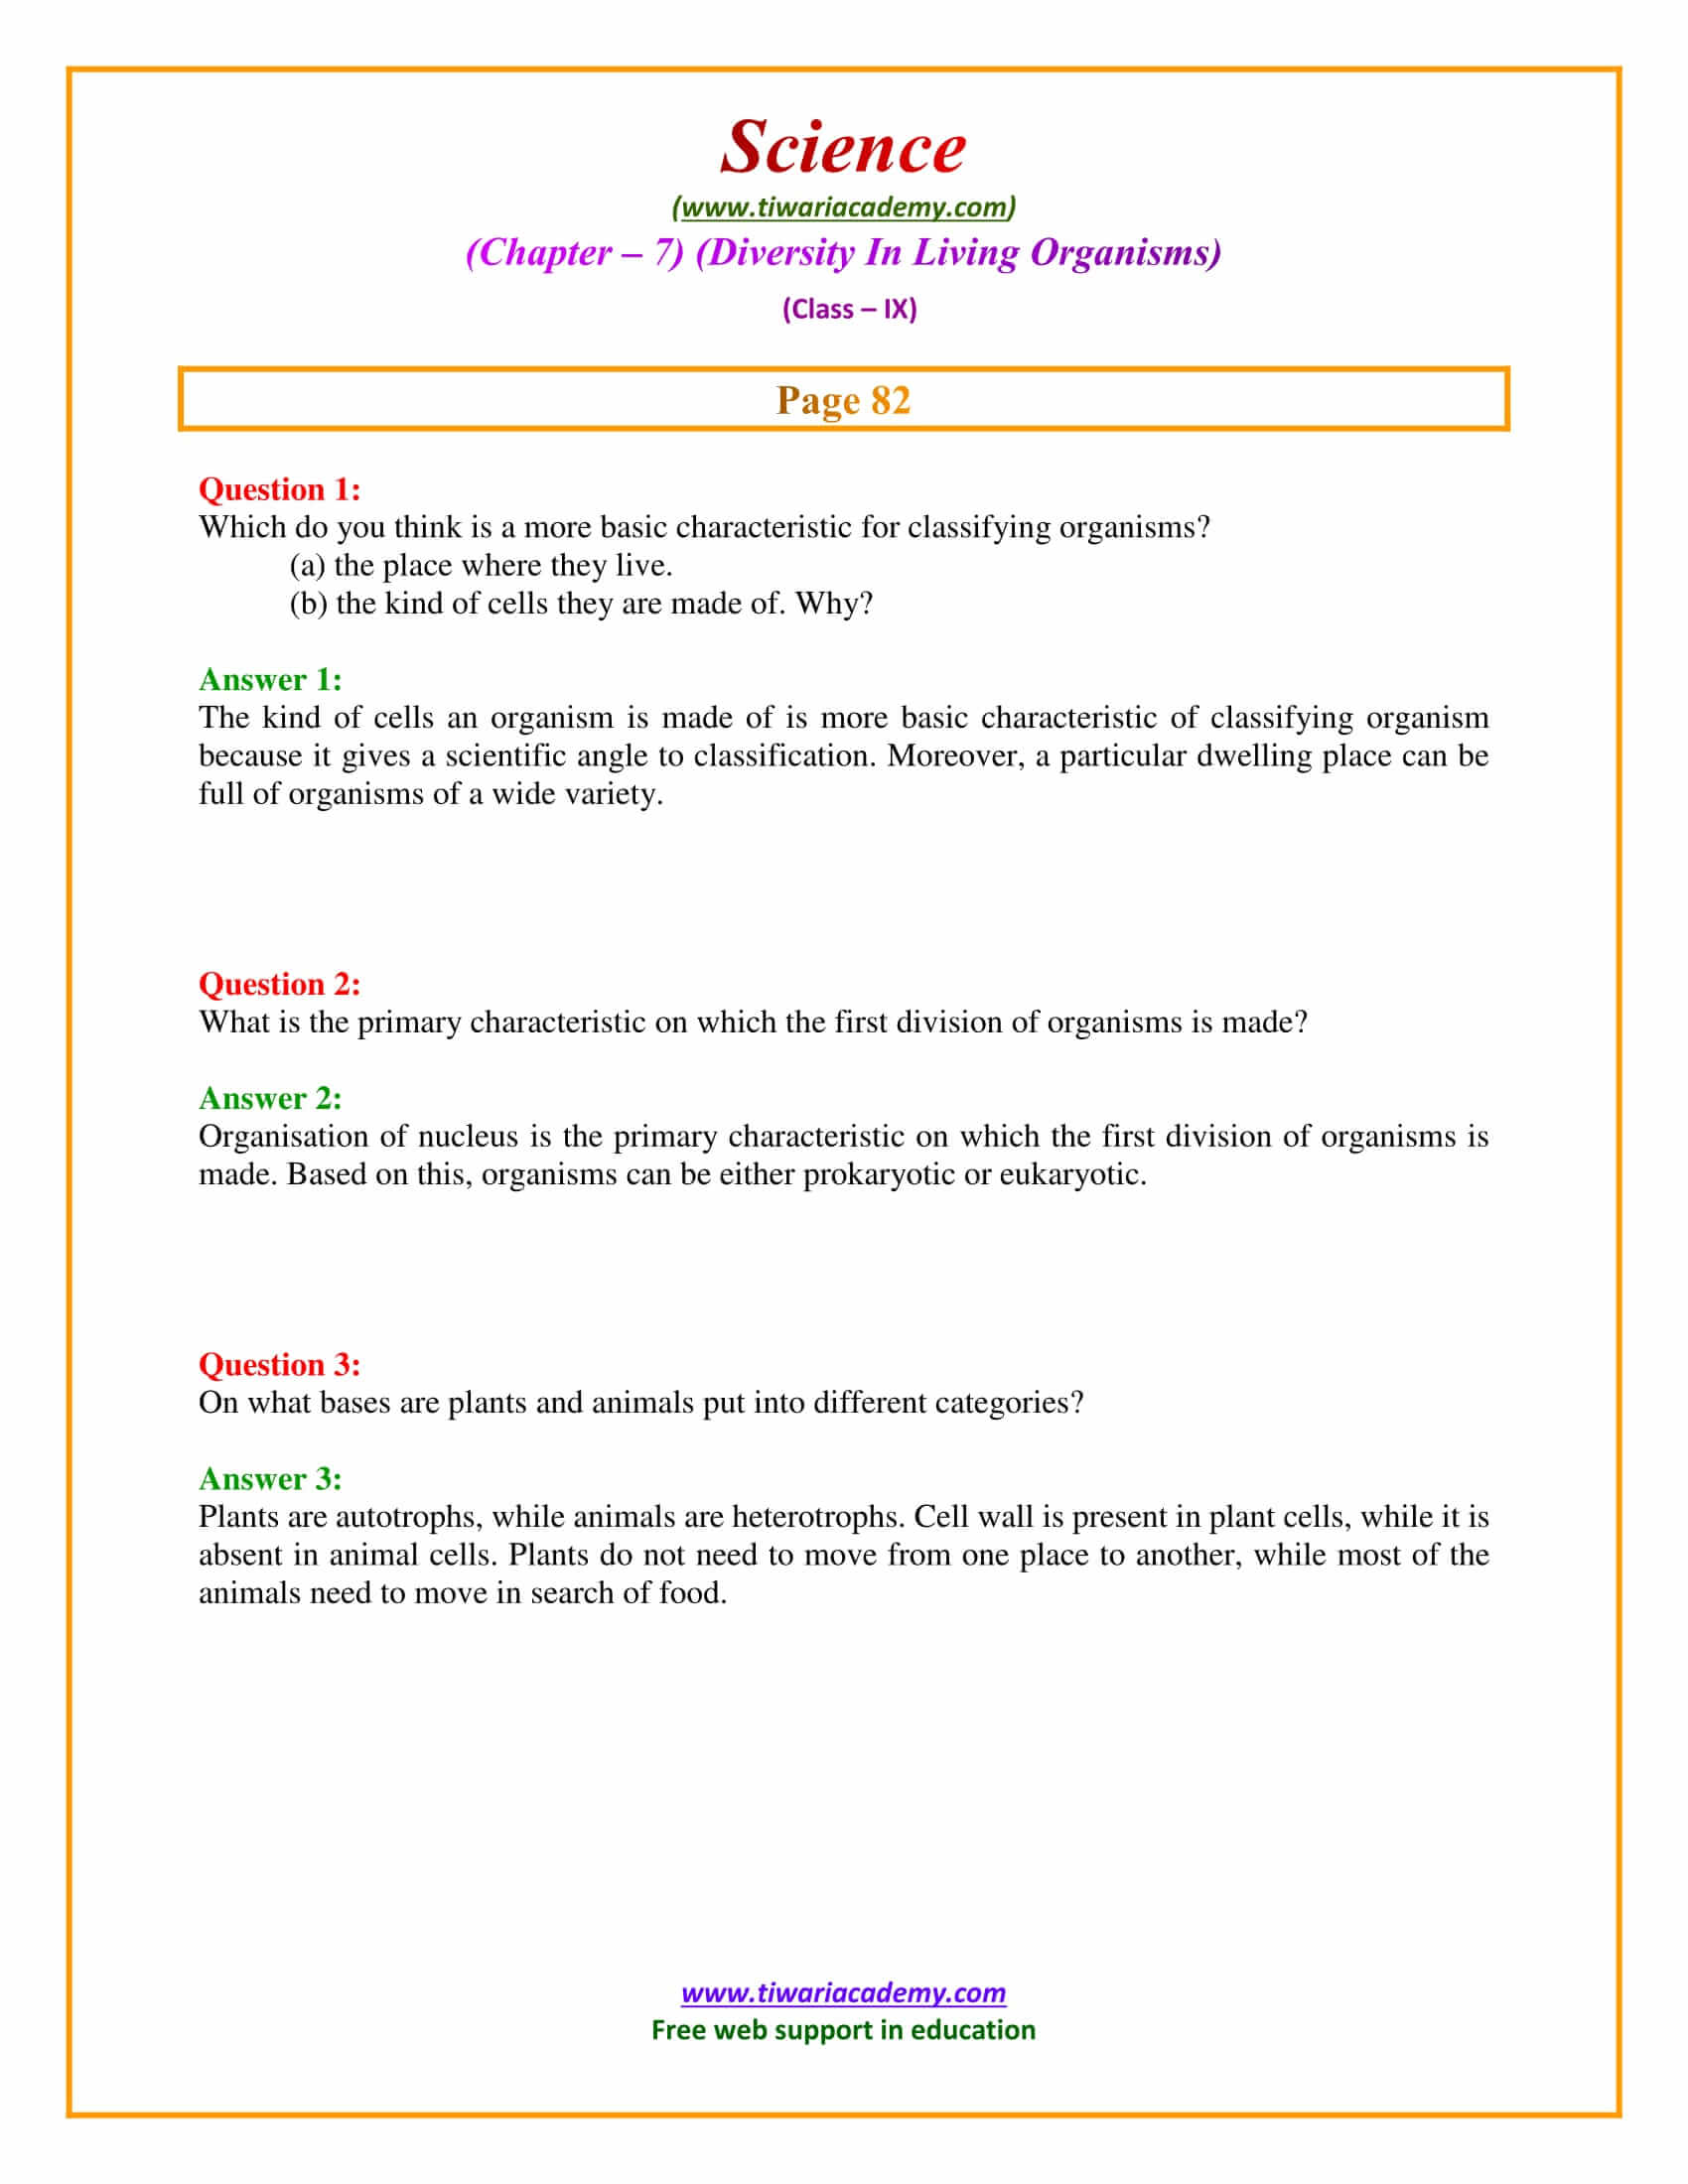 NCERT Solutions for Class 9 Science Chapter 7 Diversity in Living